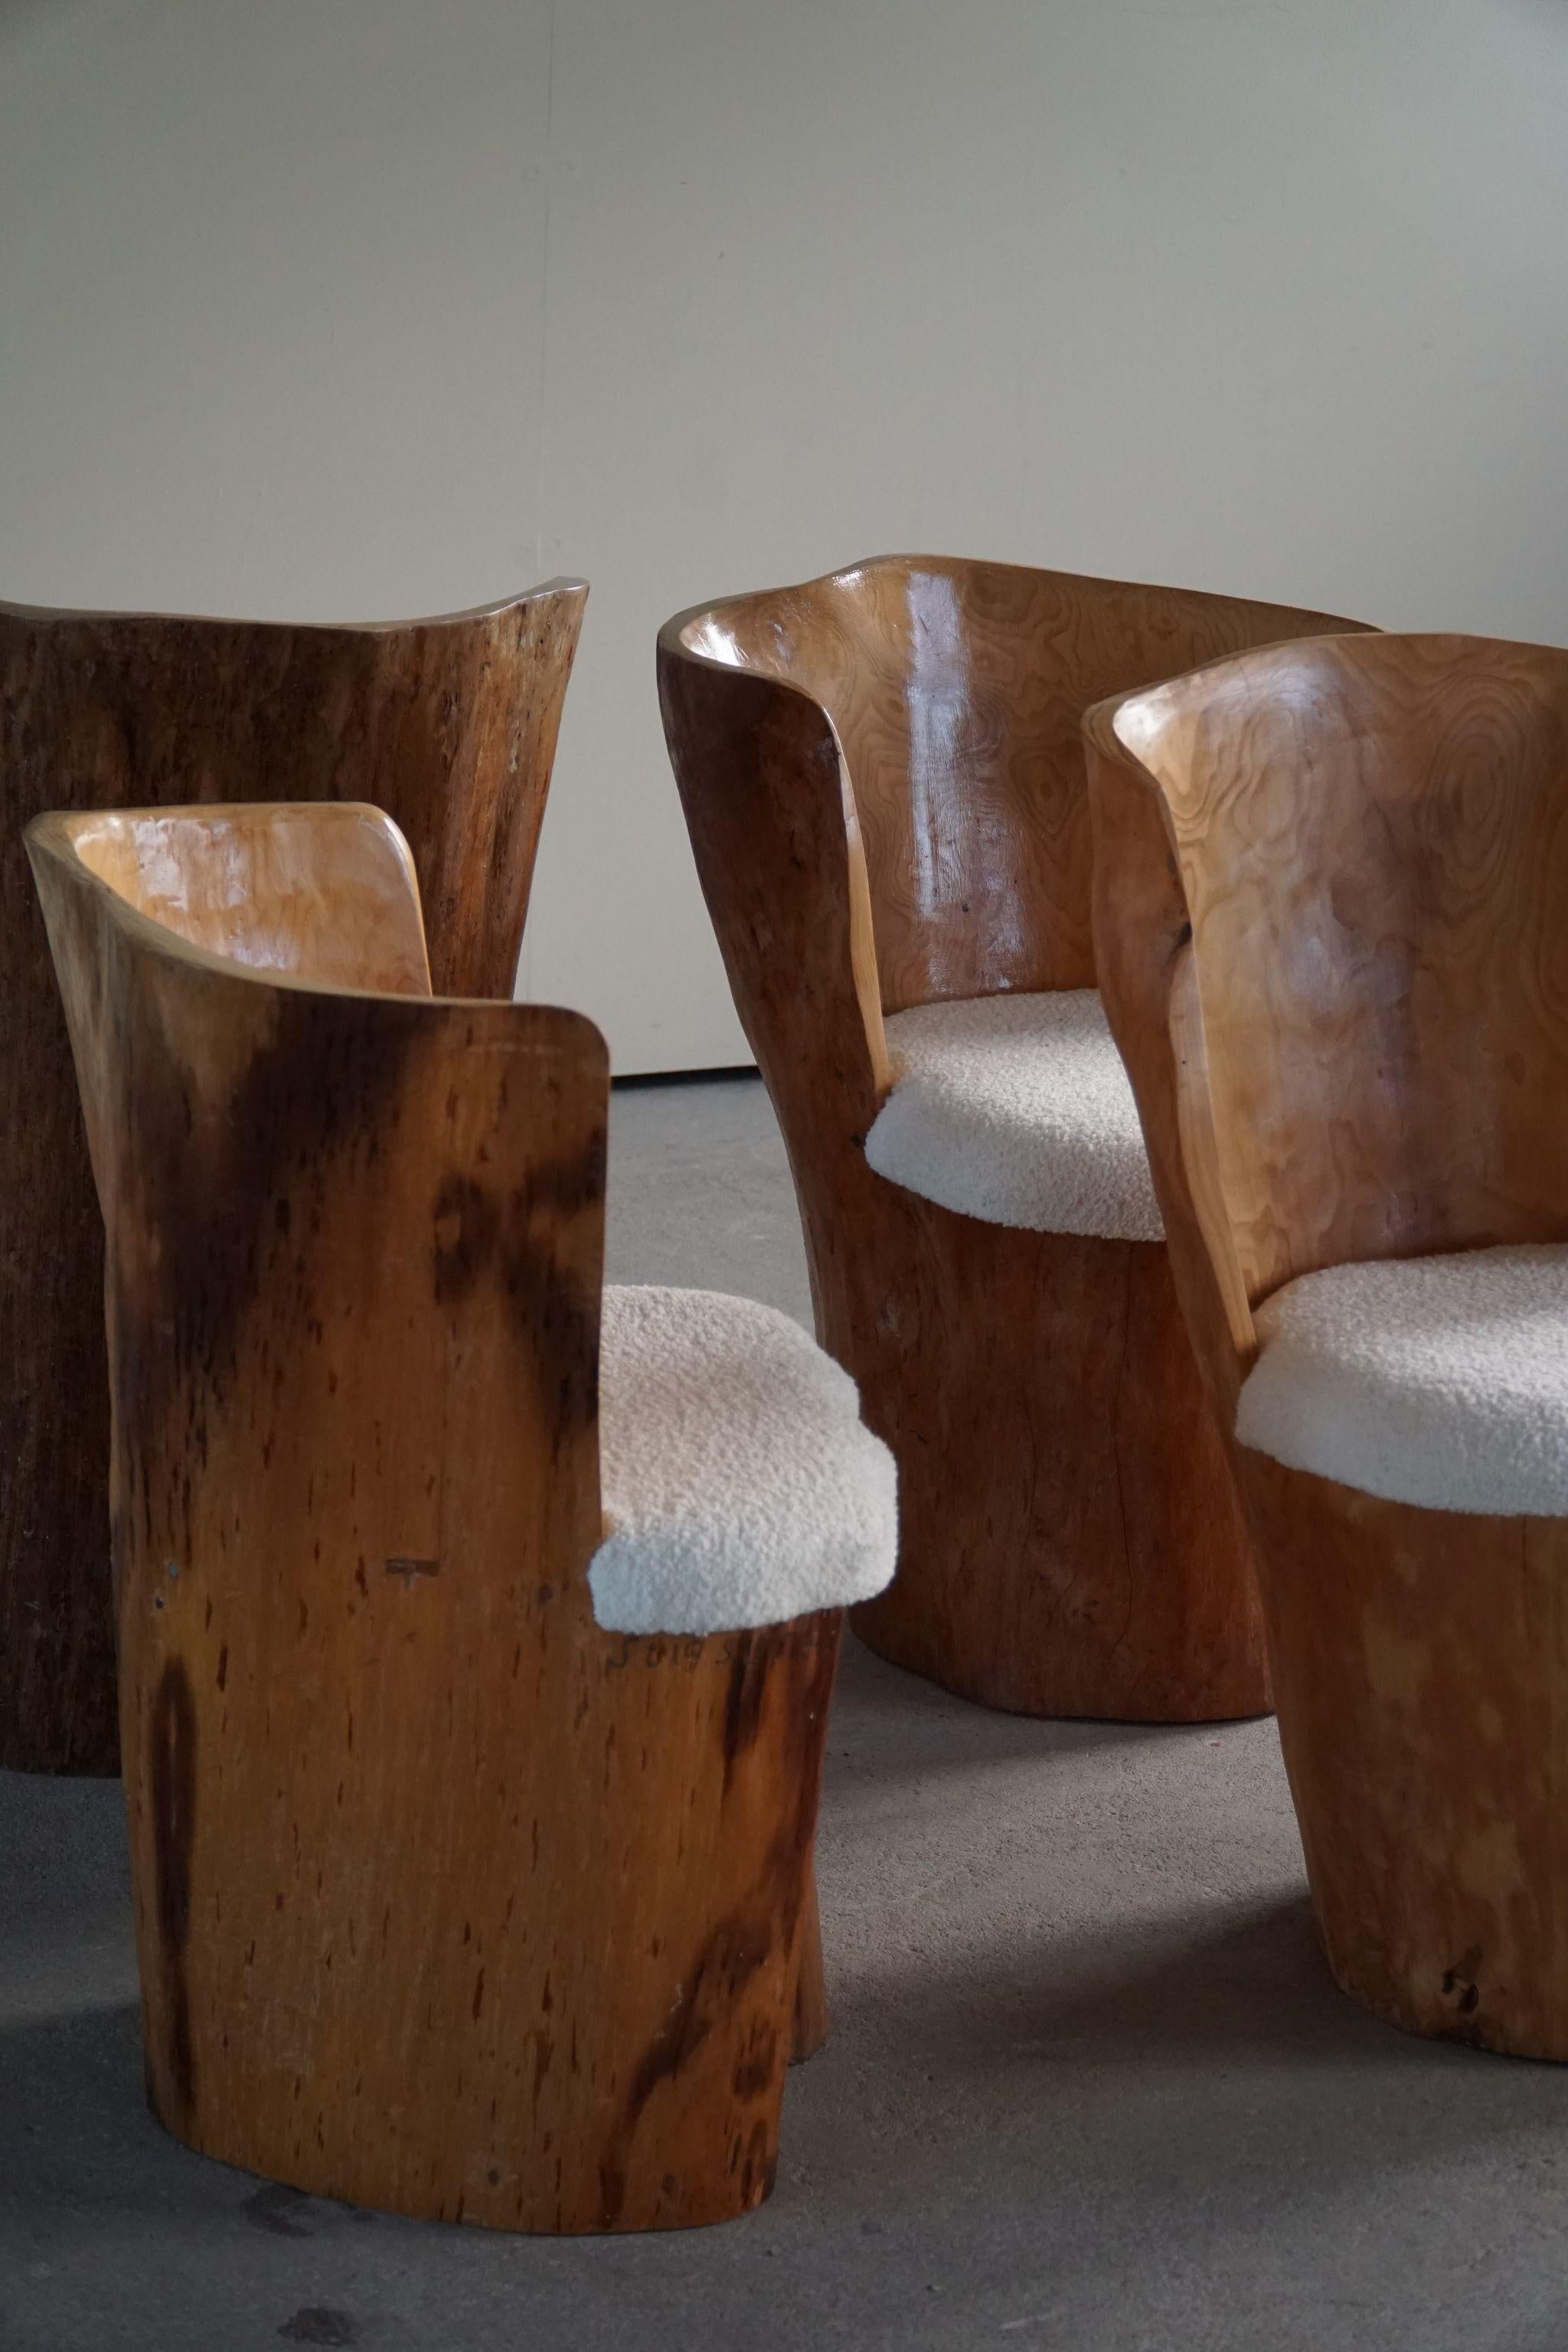 Wool Scandinavian Modern Set of 4 Stump Dining Chairs, Hand Carved in Sweden, 1980s For Sale